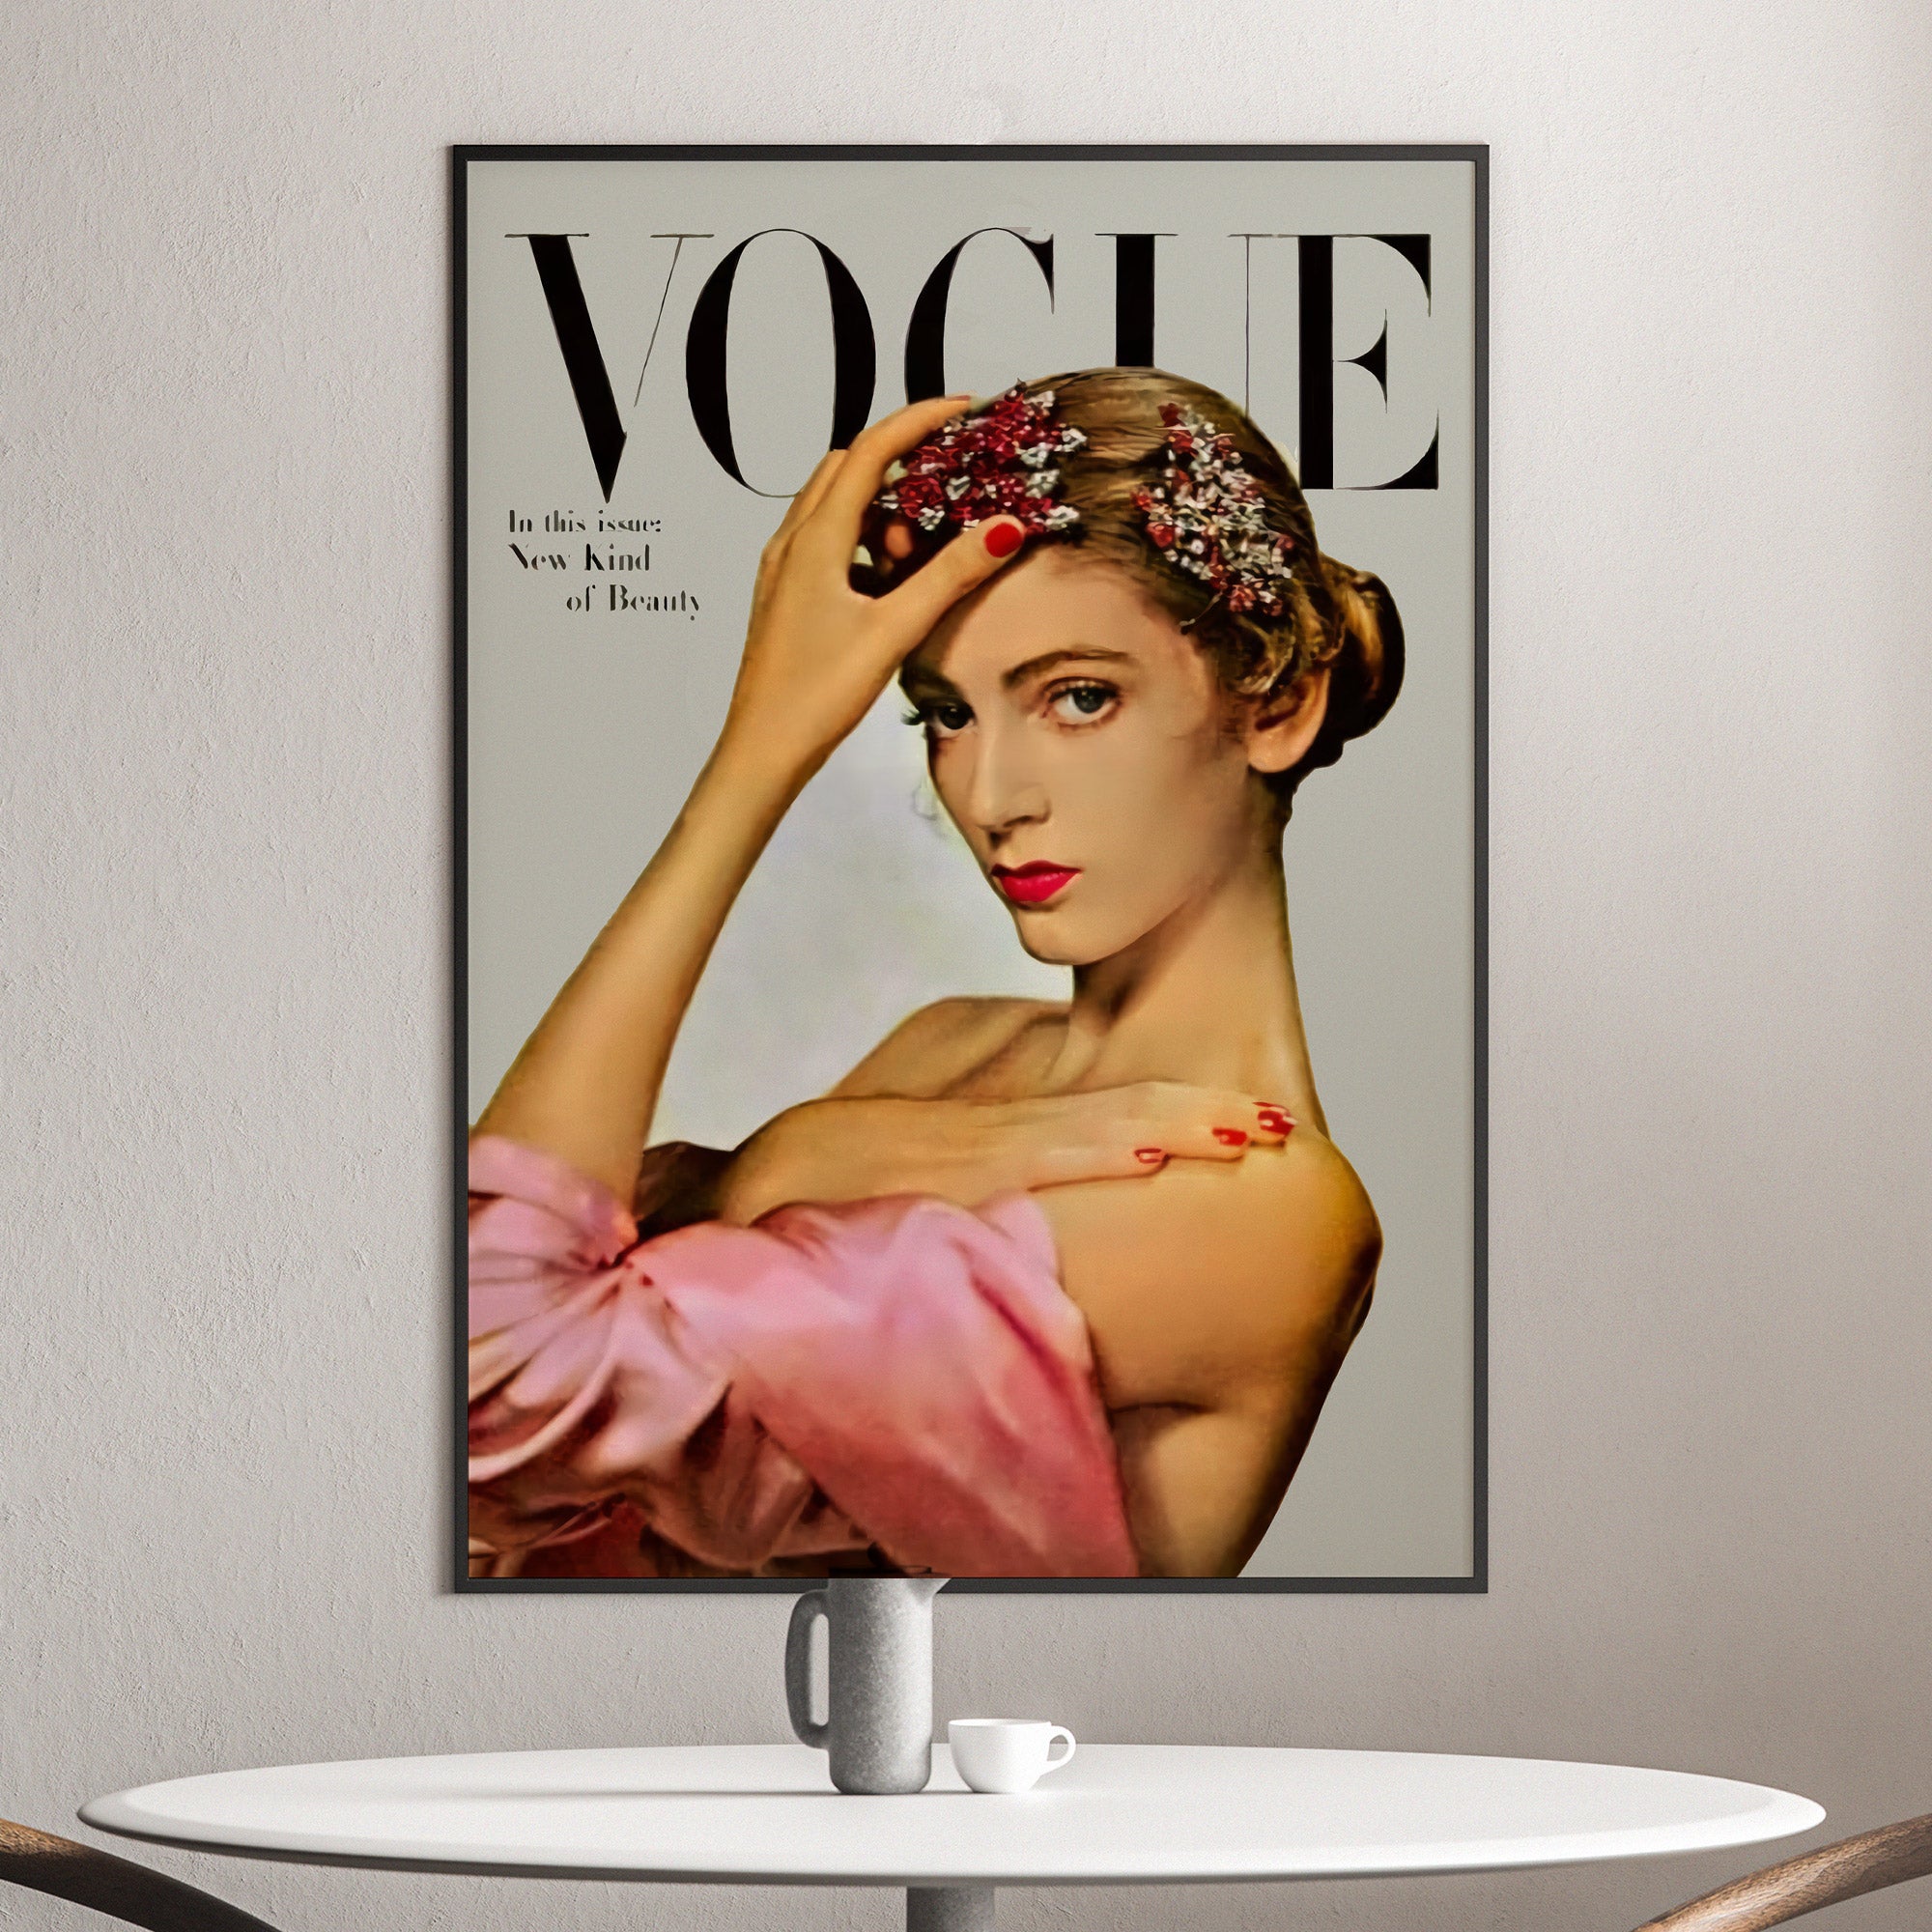 Vintage Vogue print by Vintage Advertising Collection